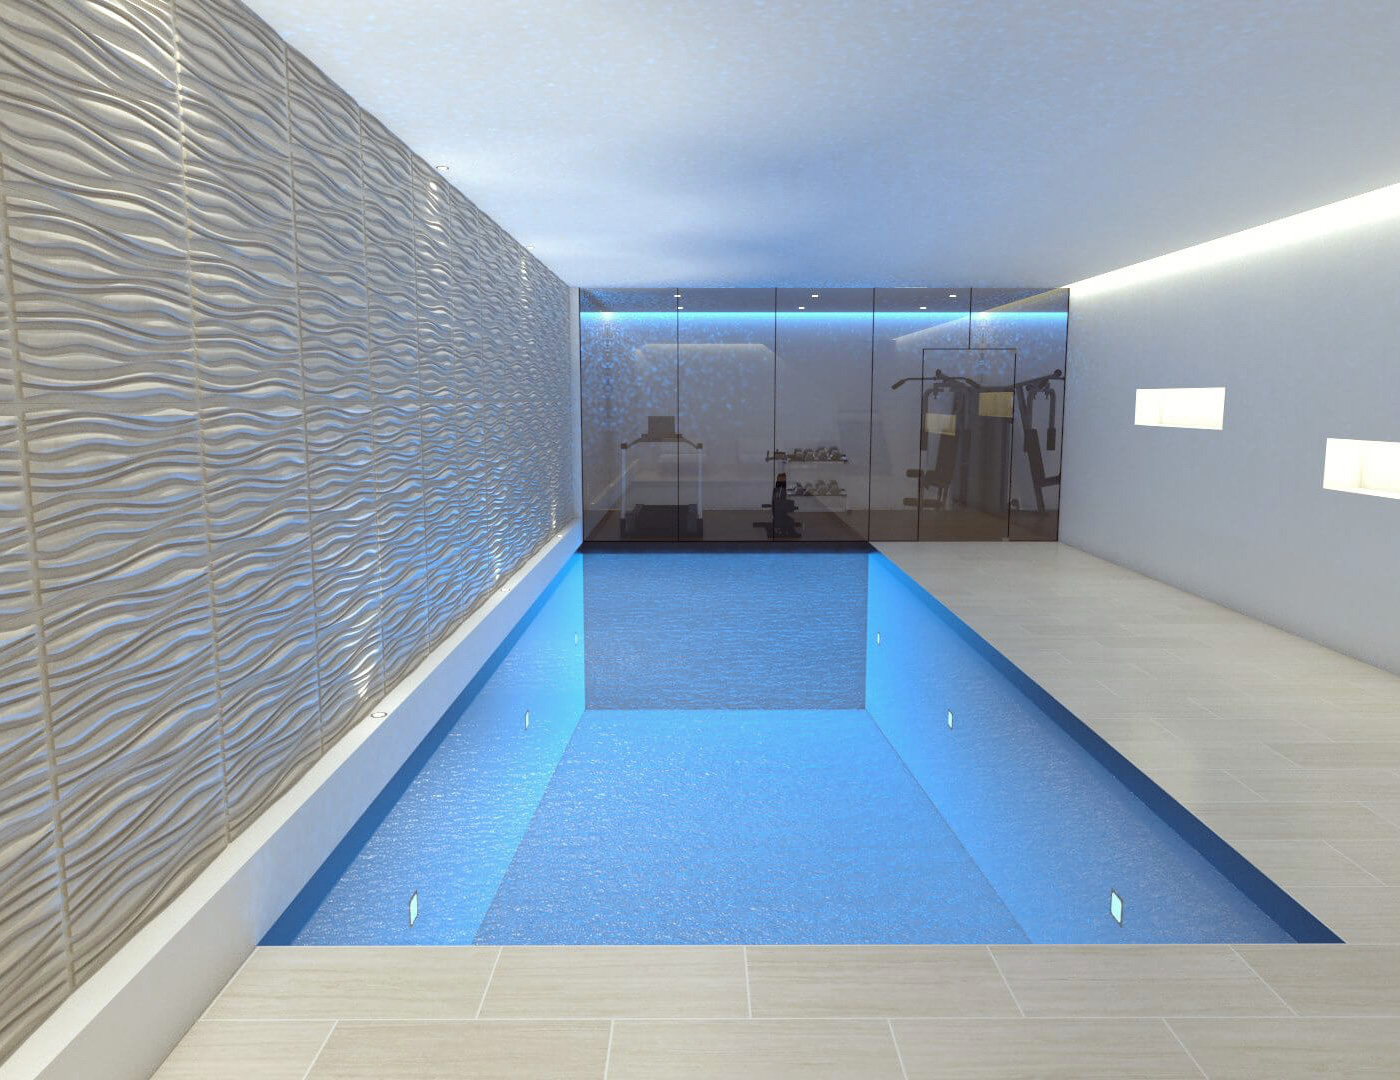 Add a Basement Swimming Pool to Your Own HomeBrothers 